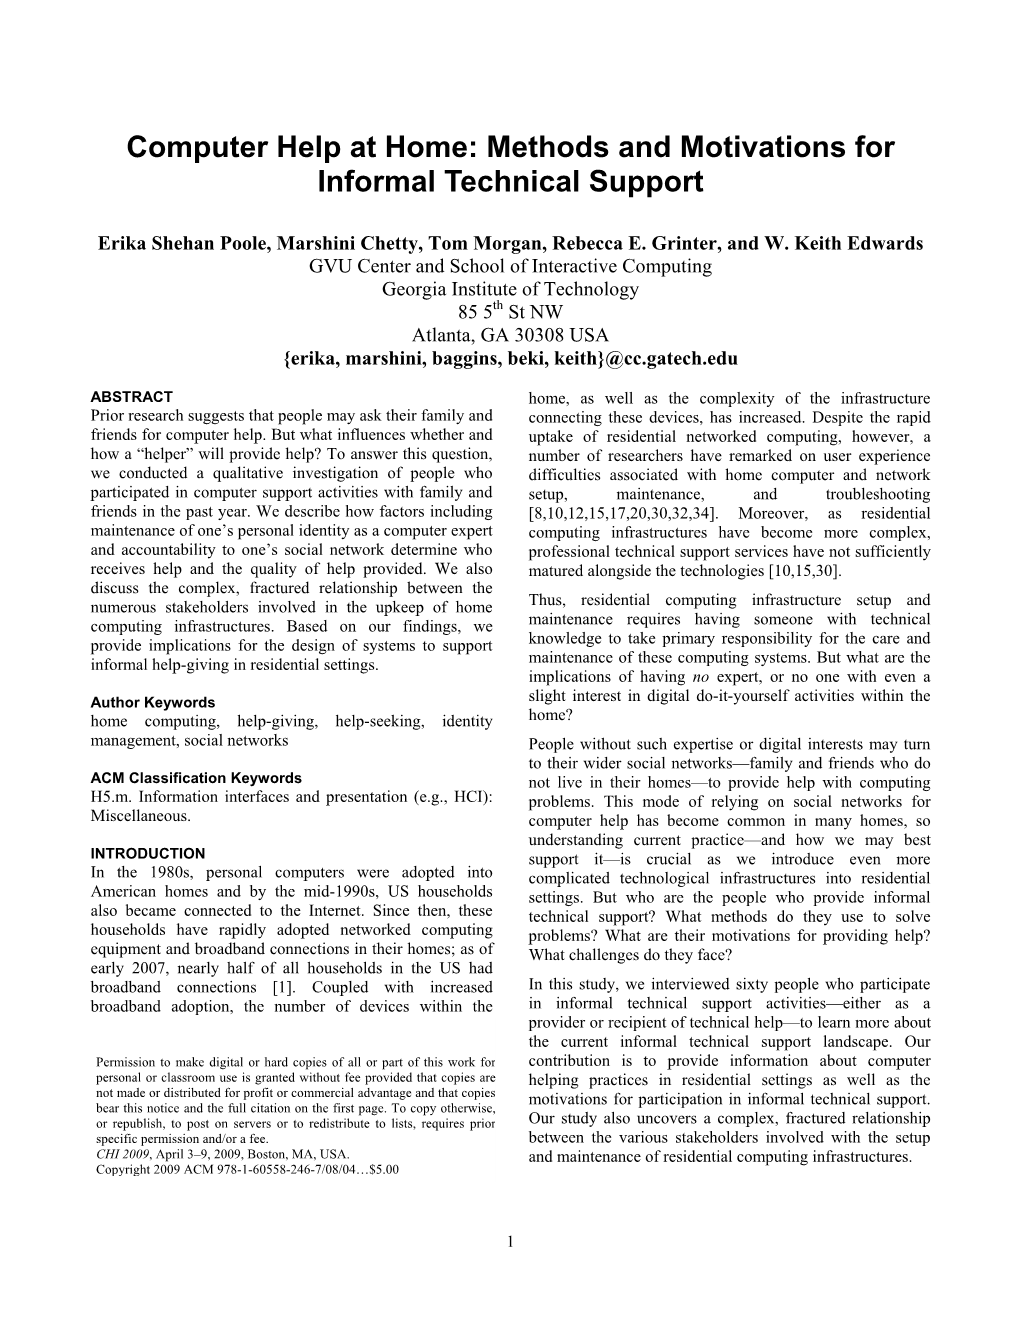 Methods and Motivations for Informal Technical Support